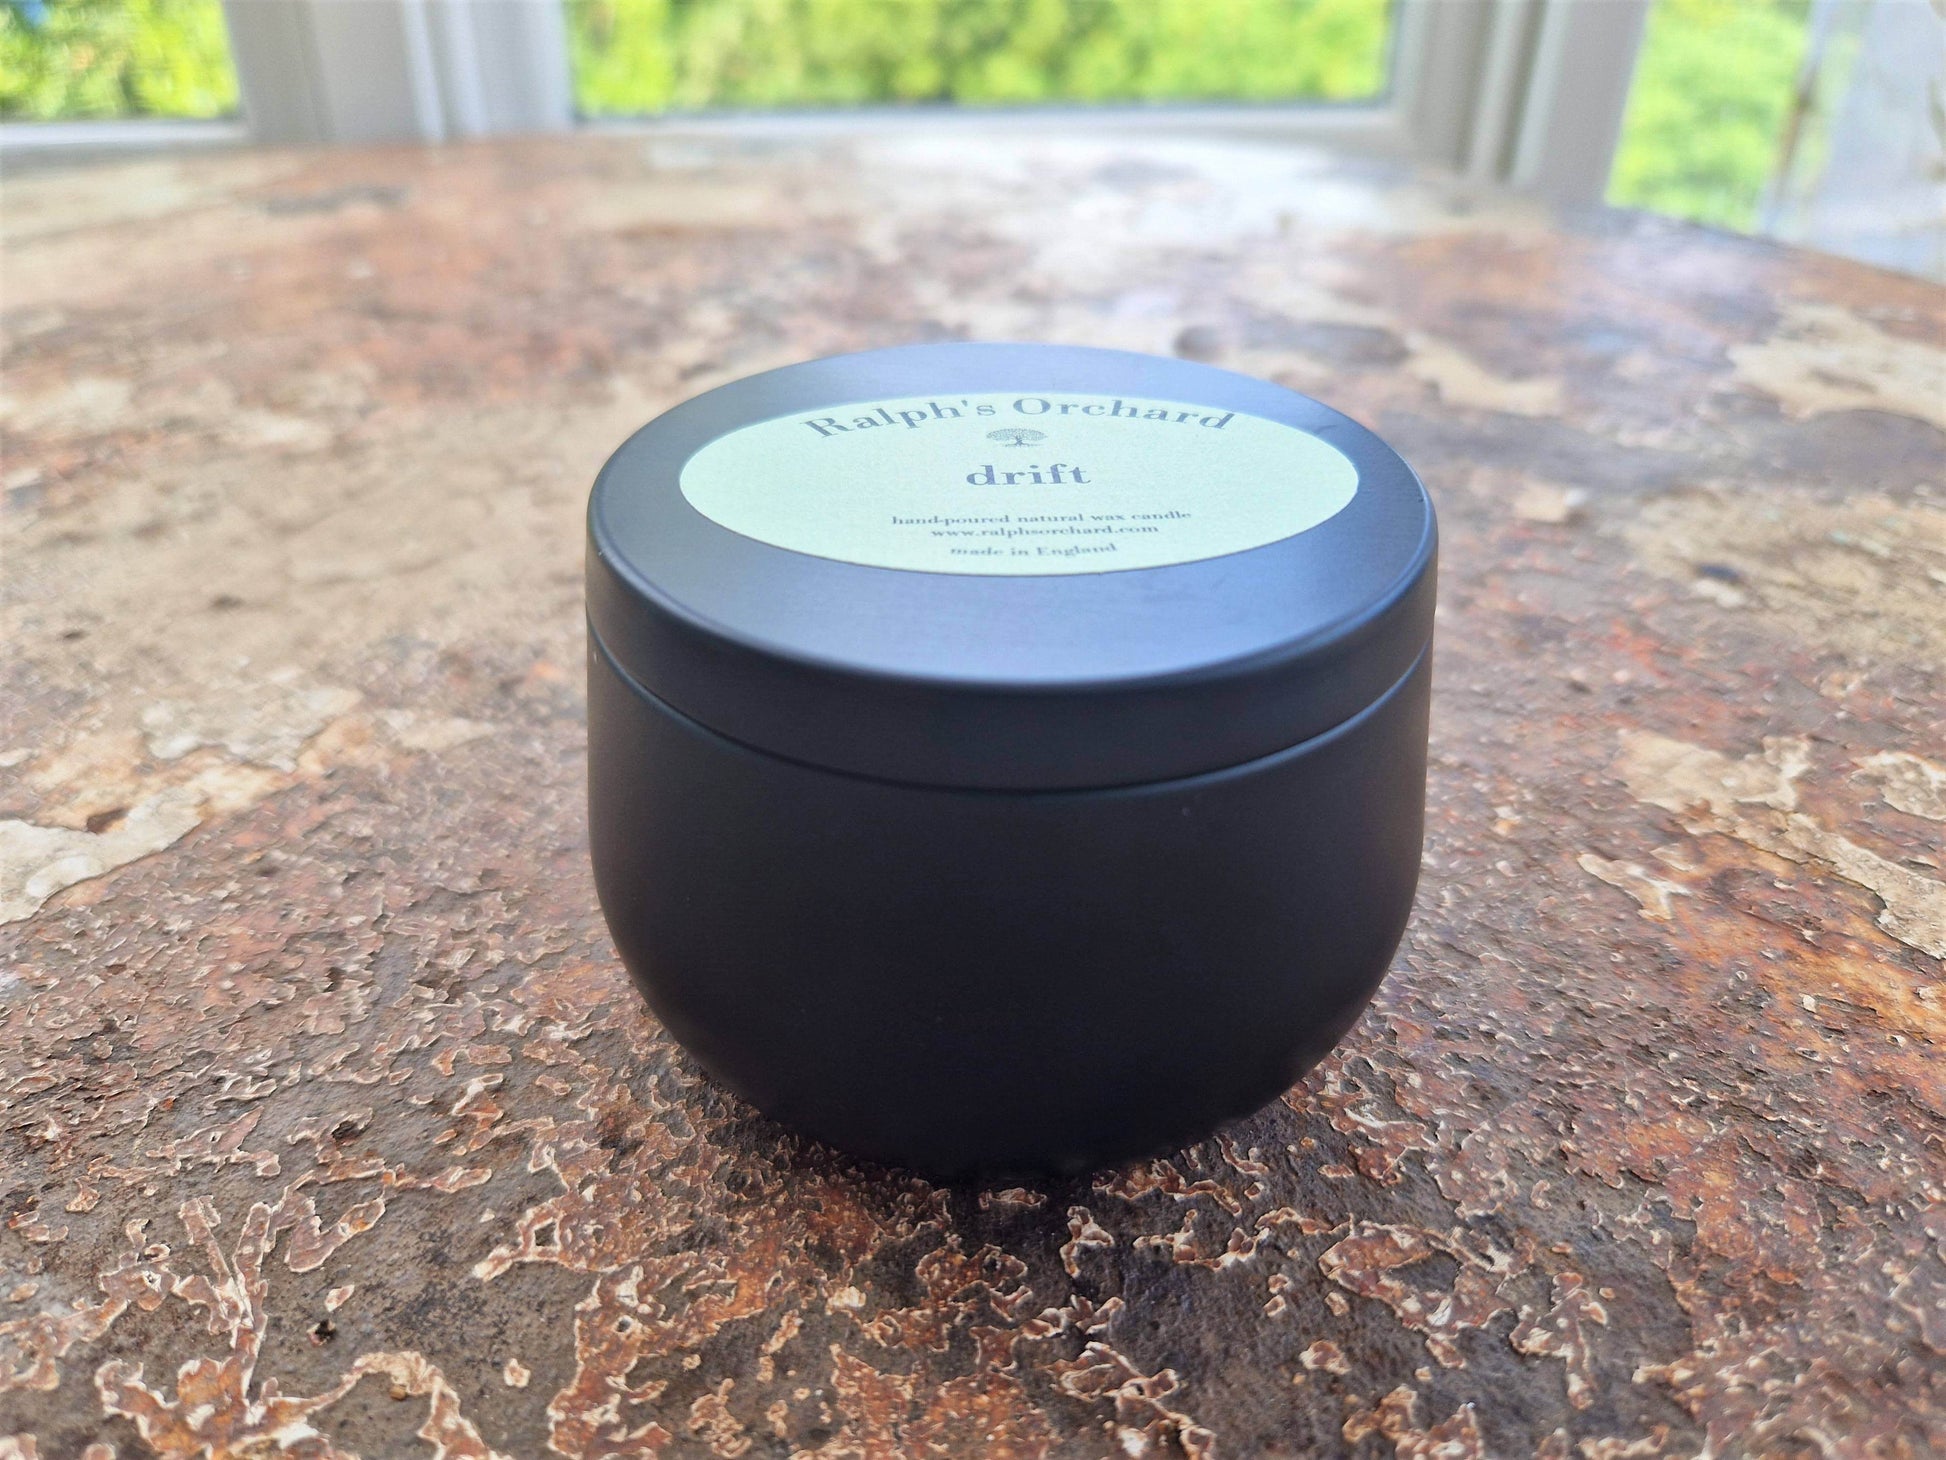 Drift scented candle in black tin